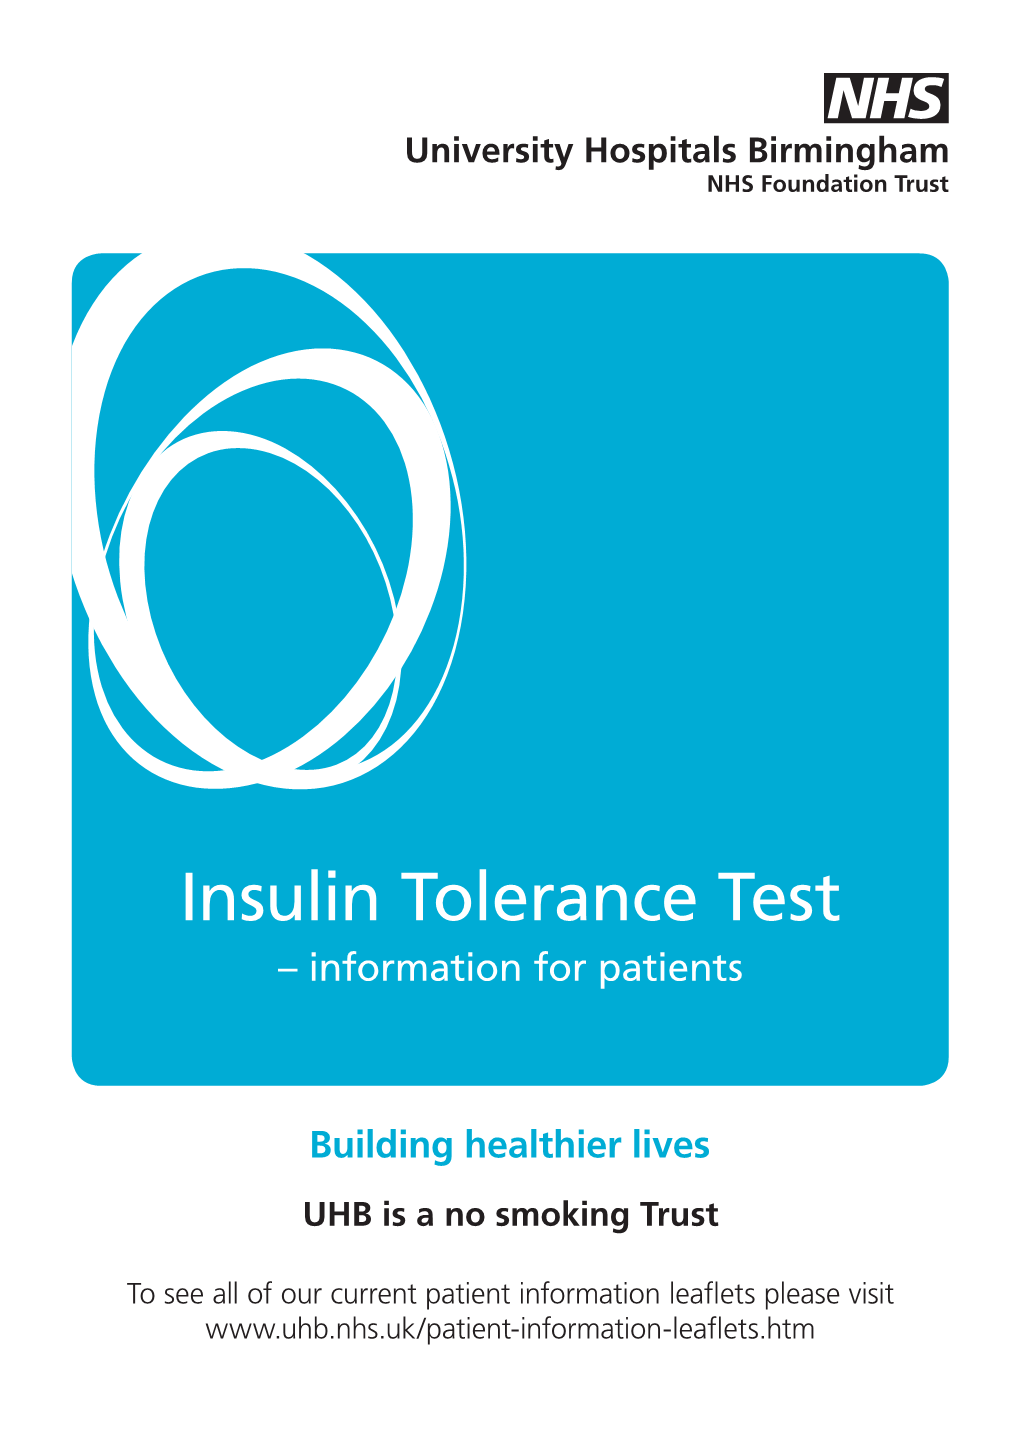 Insulin Tolerance Test – Information for Patients